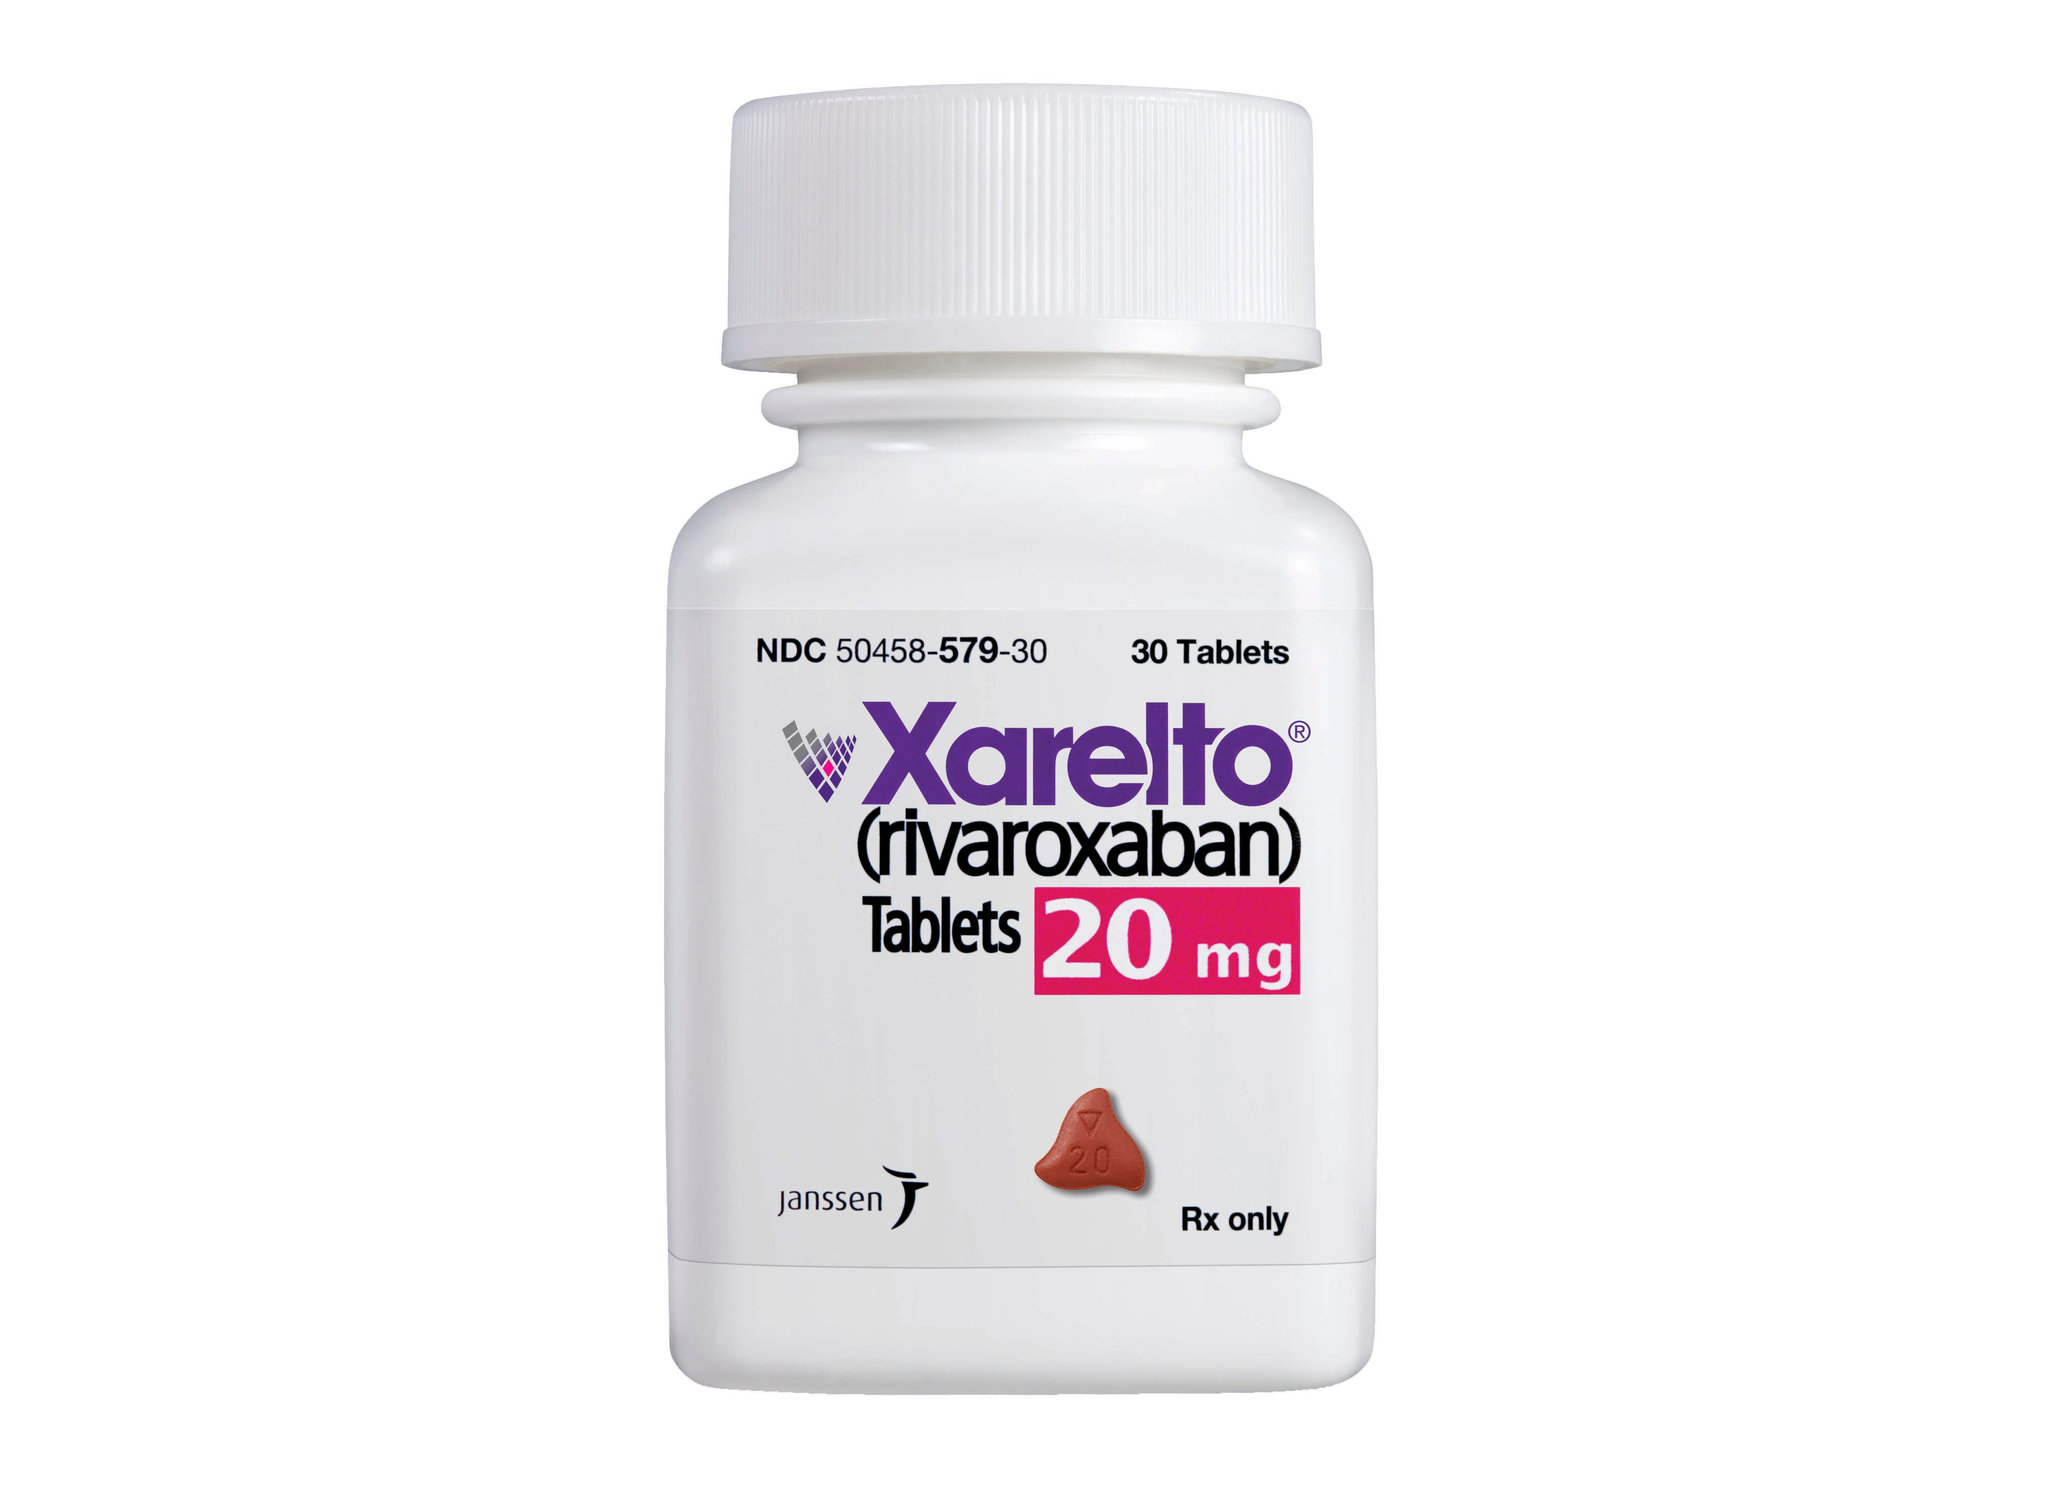 What You Need to Know about Xarelto and Its Legal Problems